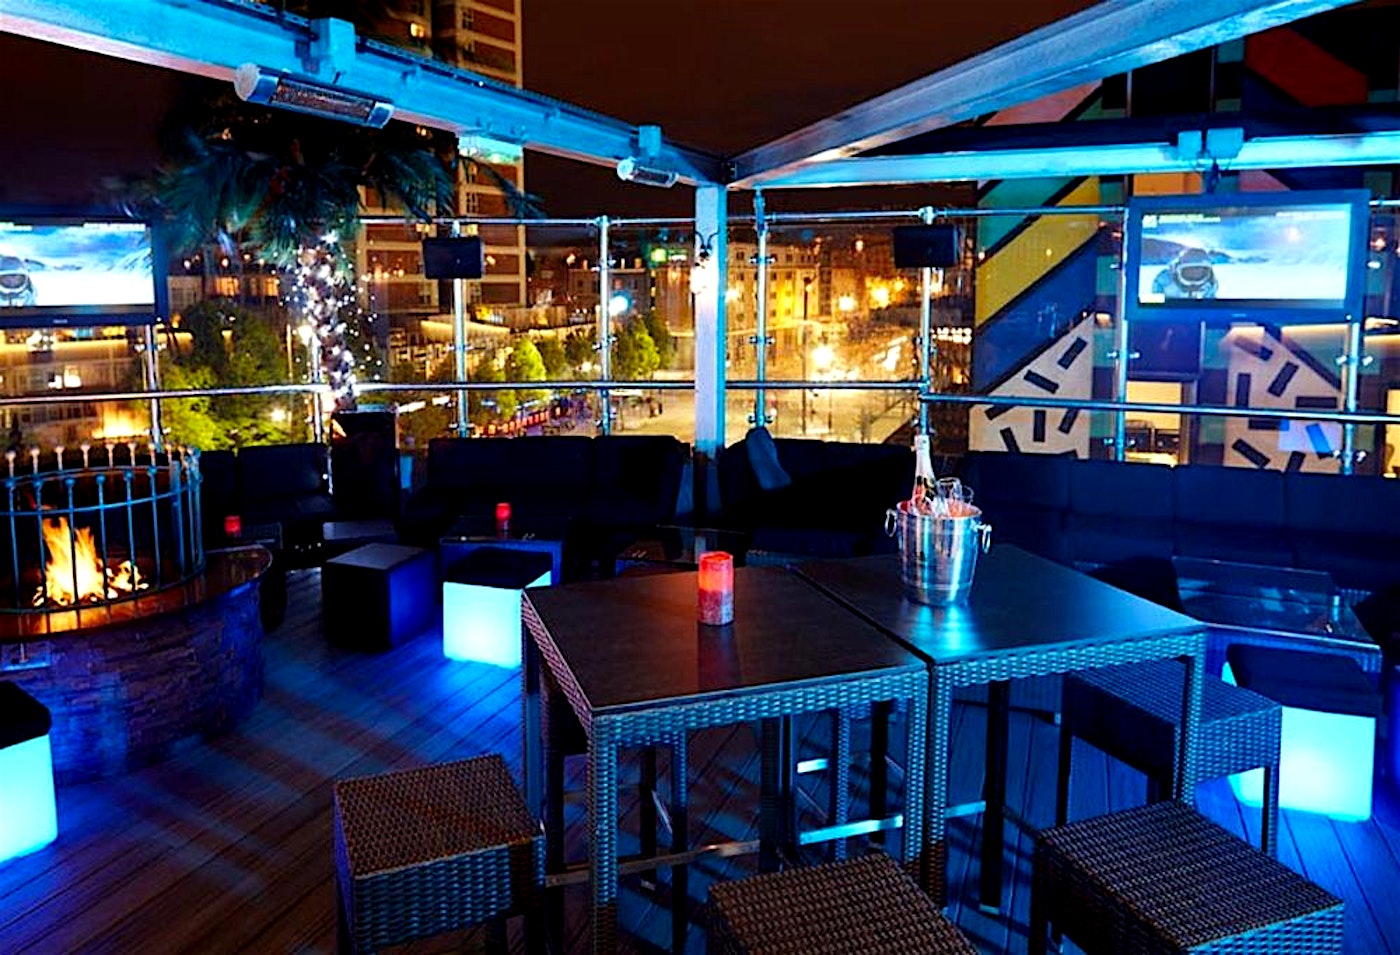 The rooftop bar at the Golden Bee, Shoreditch, east London, seen at night.